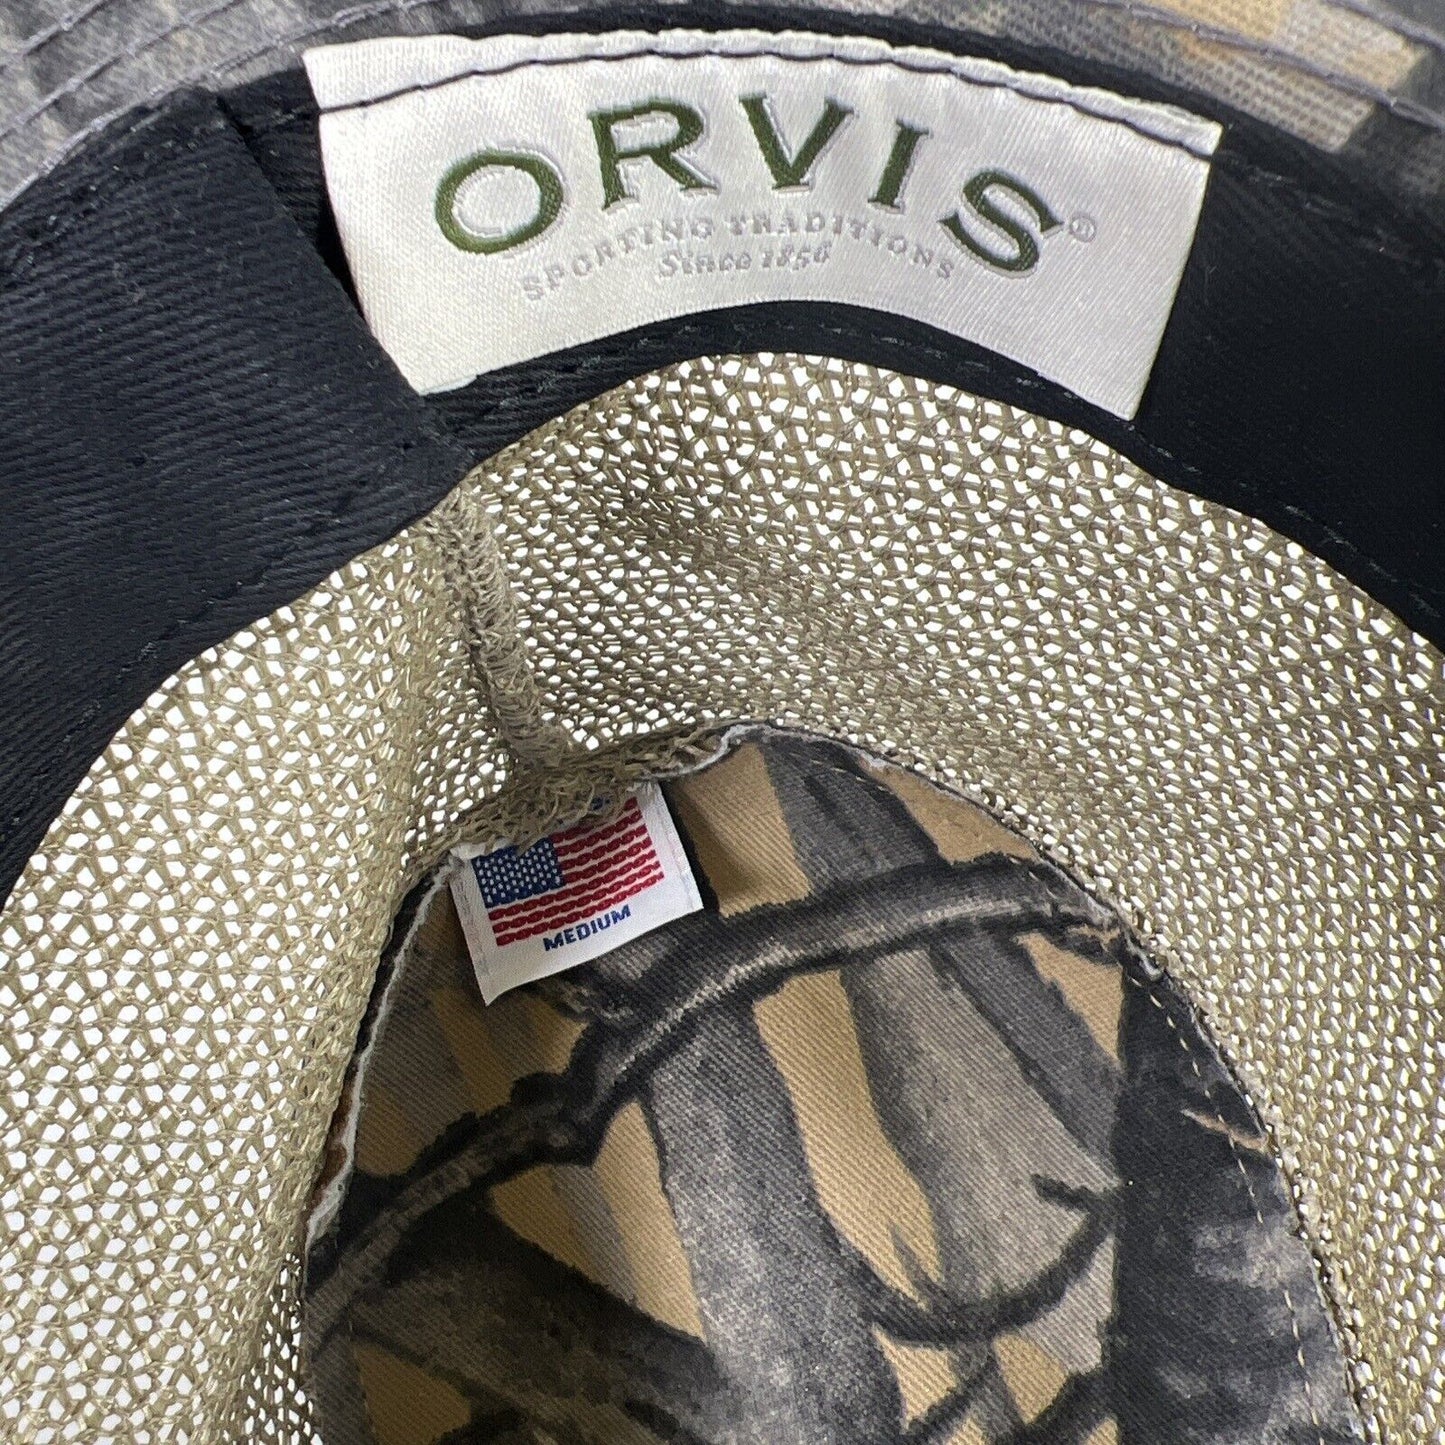 Orvis Men's Green Camouflage Mesh Top Fedora Style Hat - M